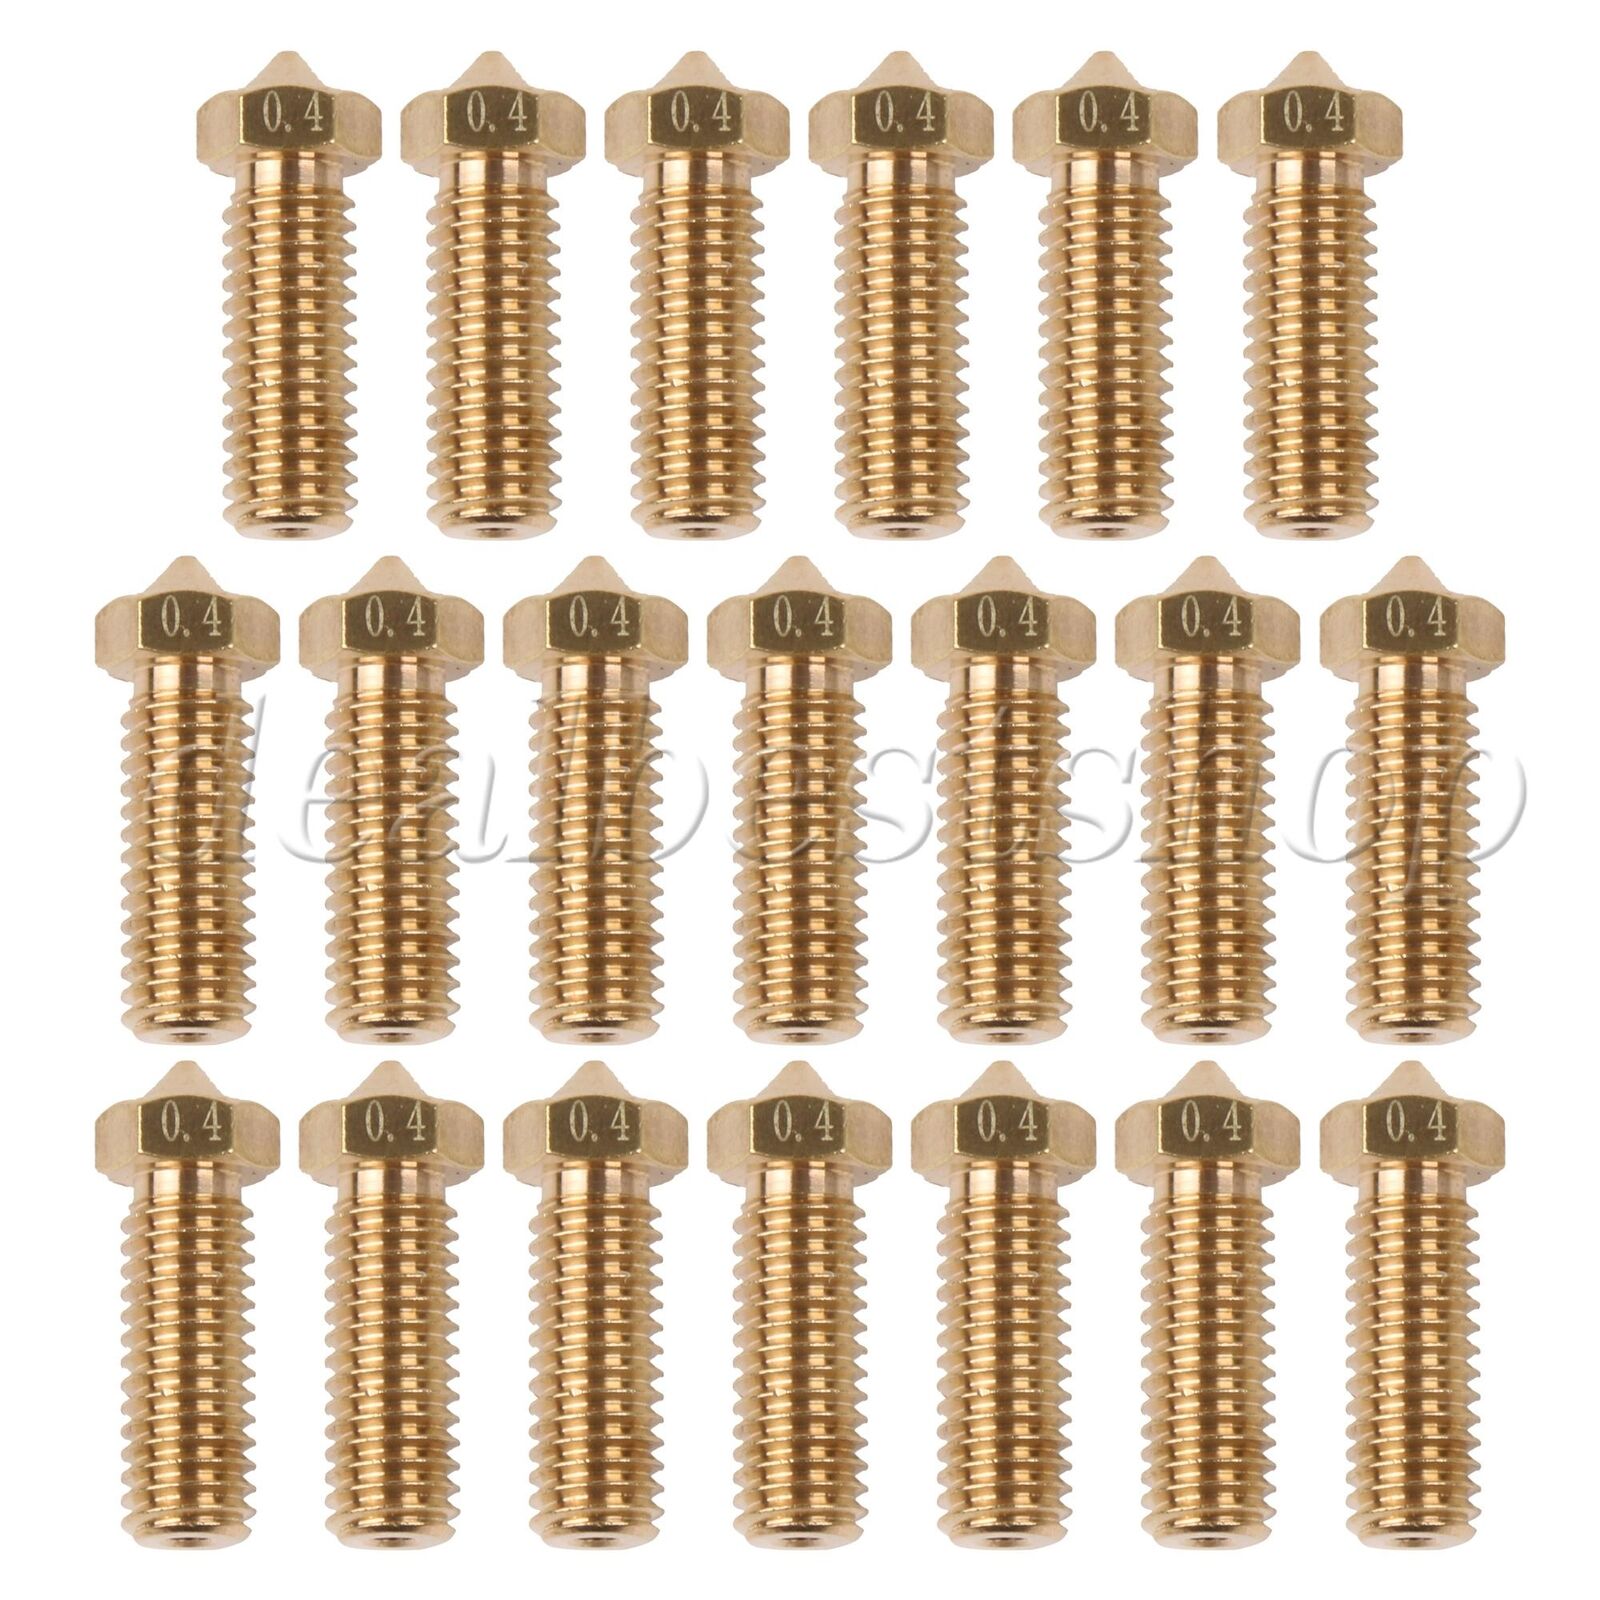 20x Brass Extruder Nozzle M6 Thread 0.4mm for 3D Printer 1.75mm Filament